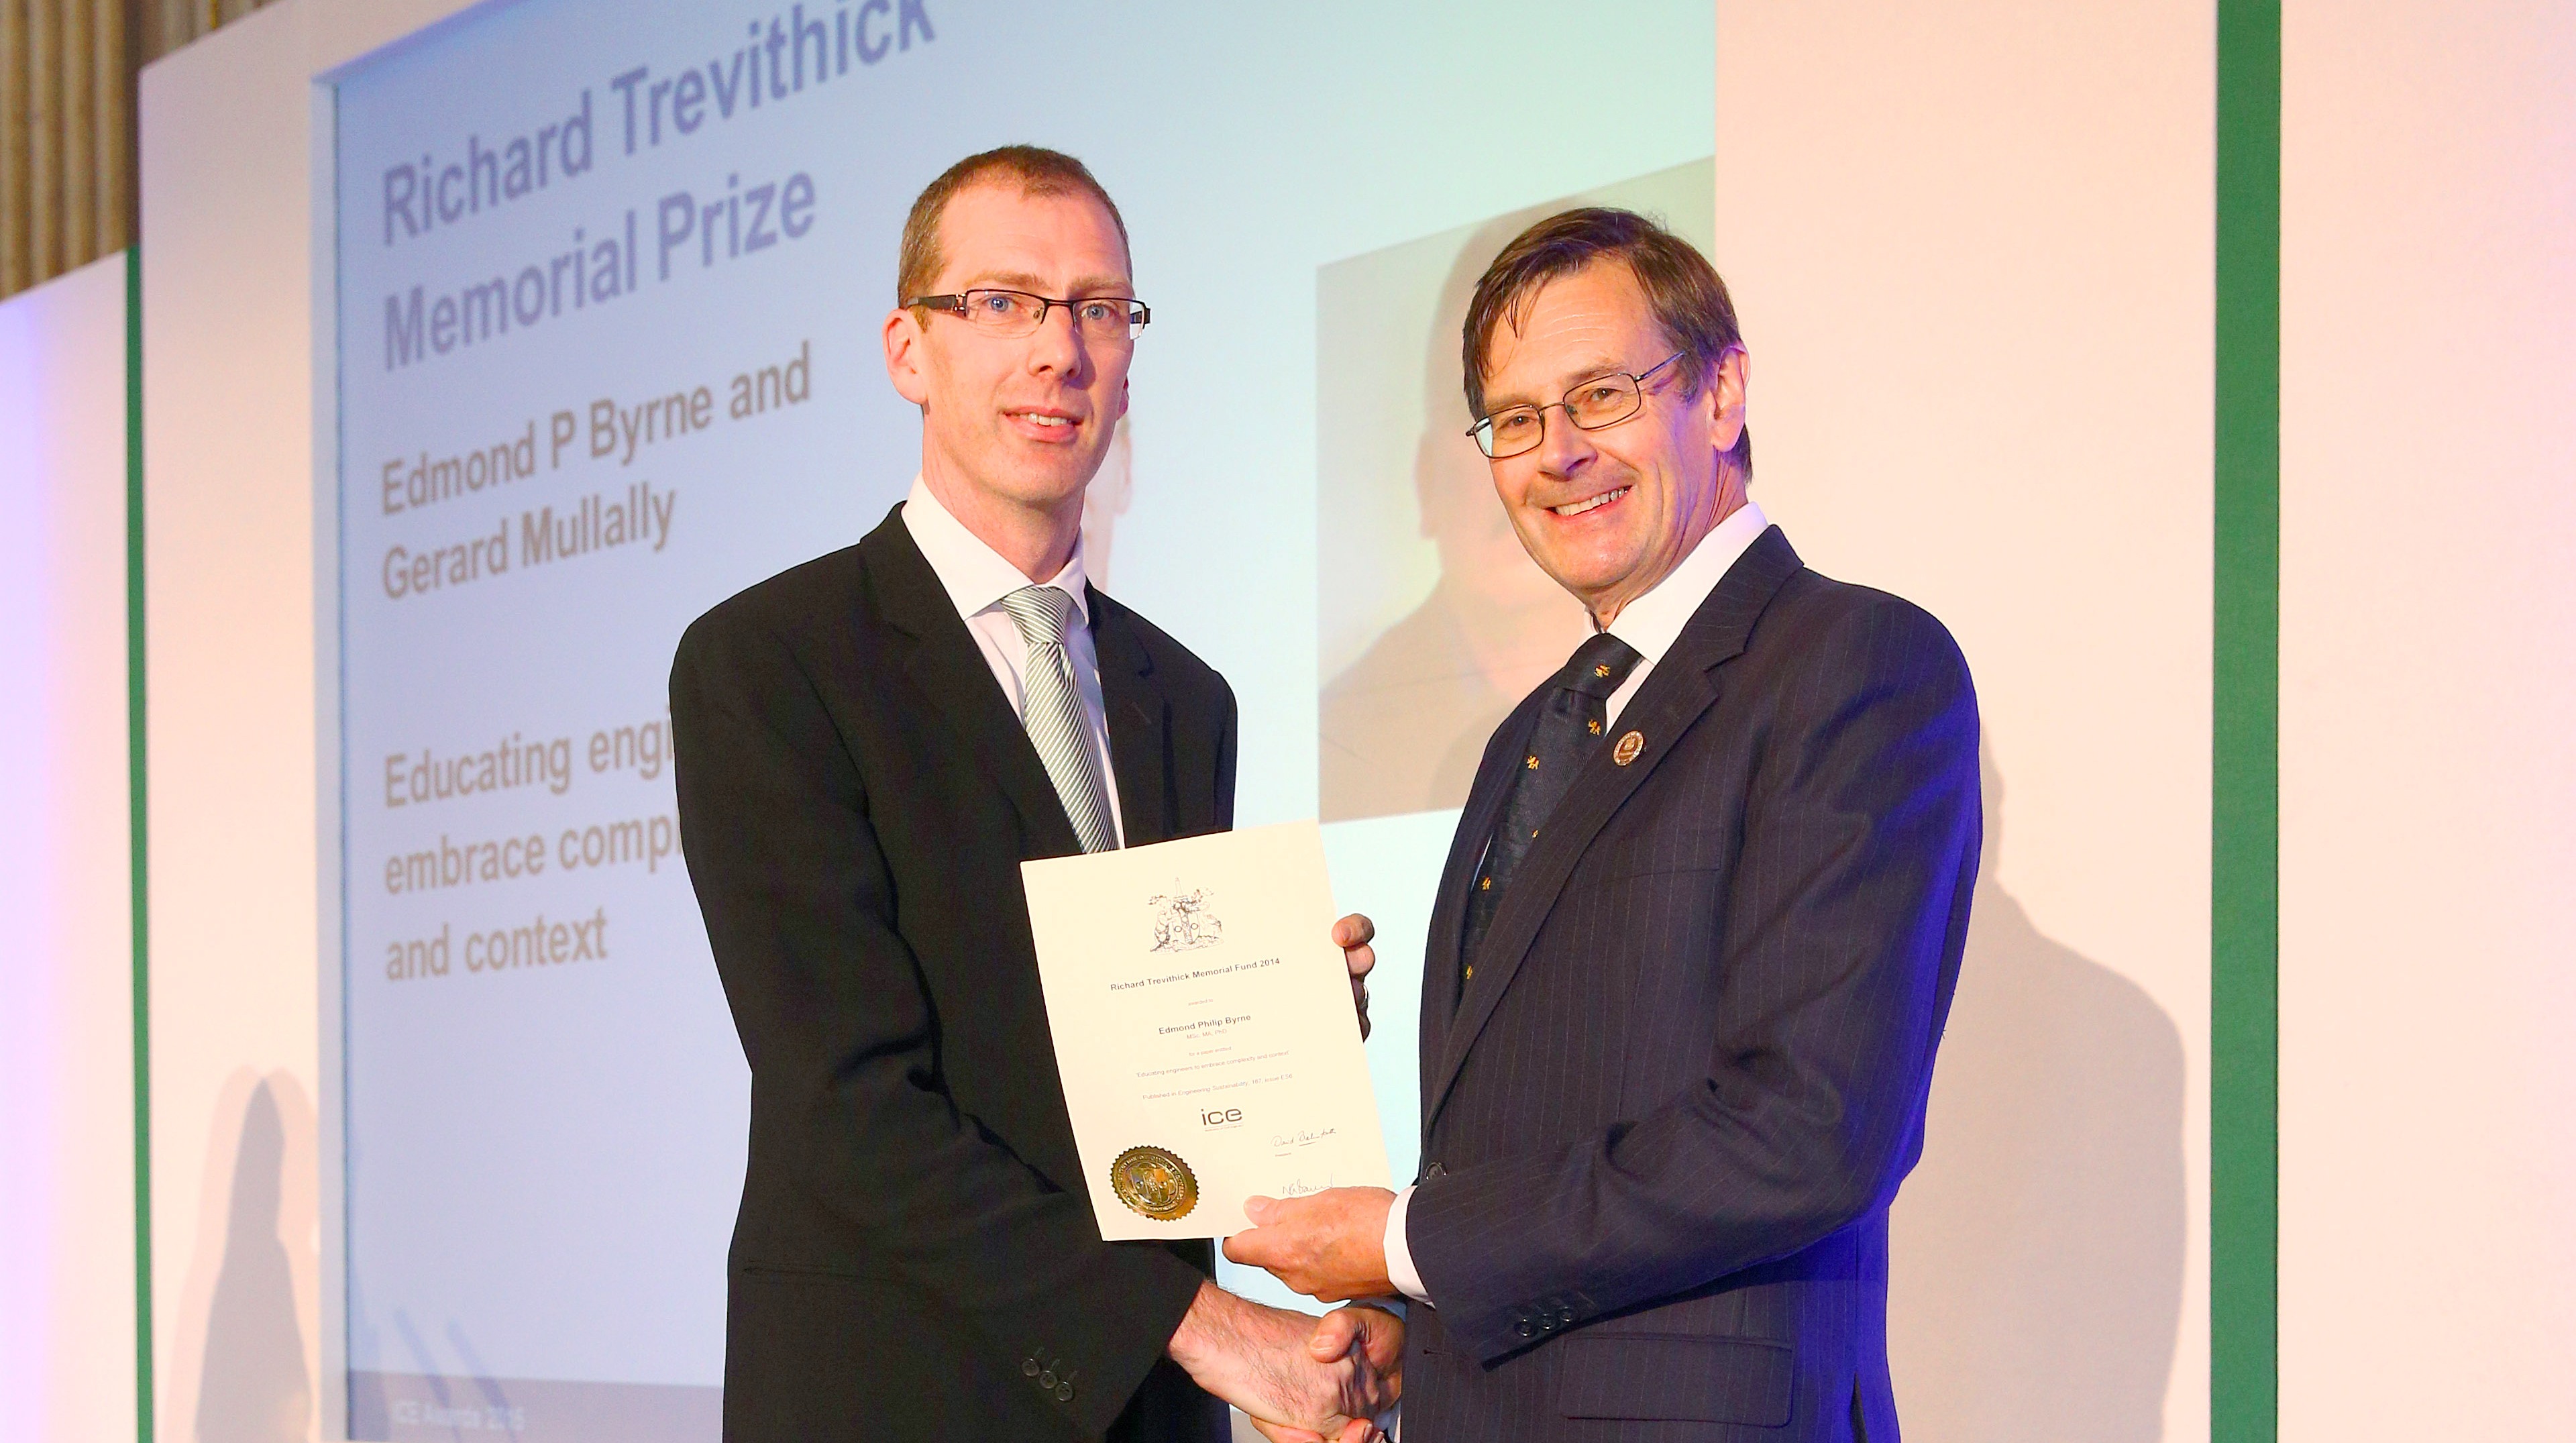 Dr Edmond Byrne Awarded Trevithick Prize for UCC Engineering Education Research